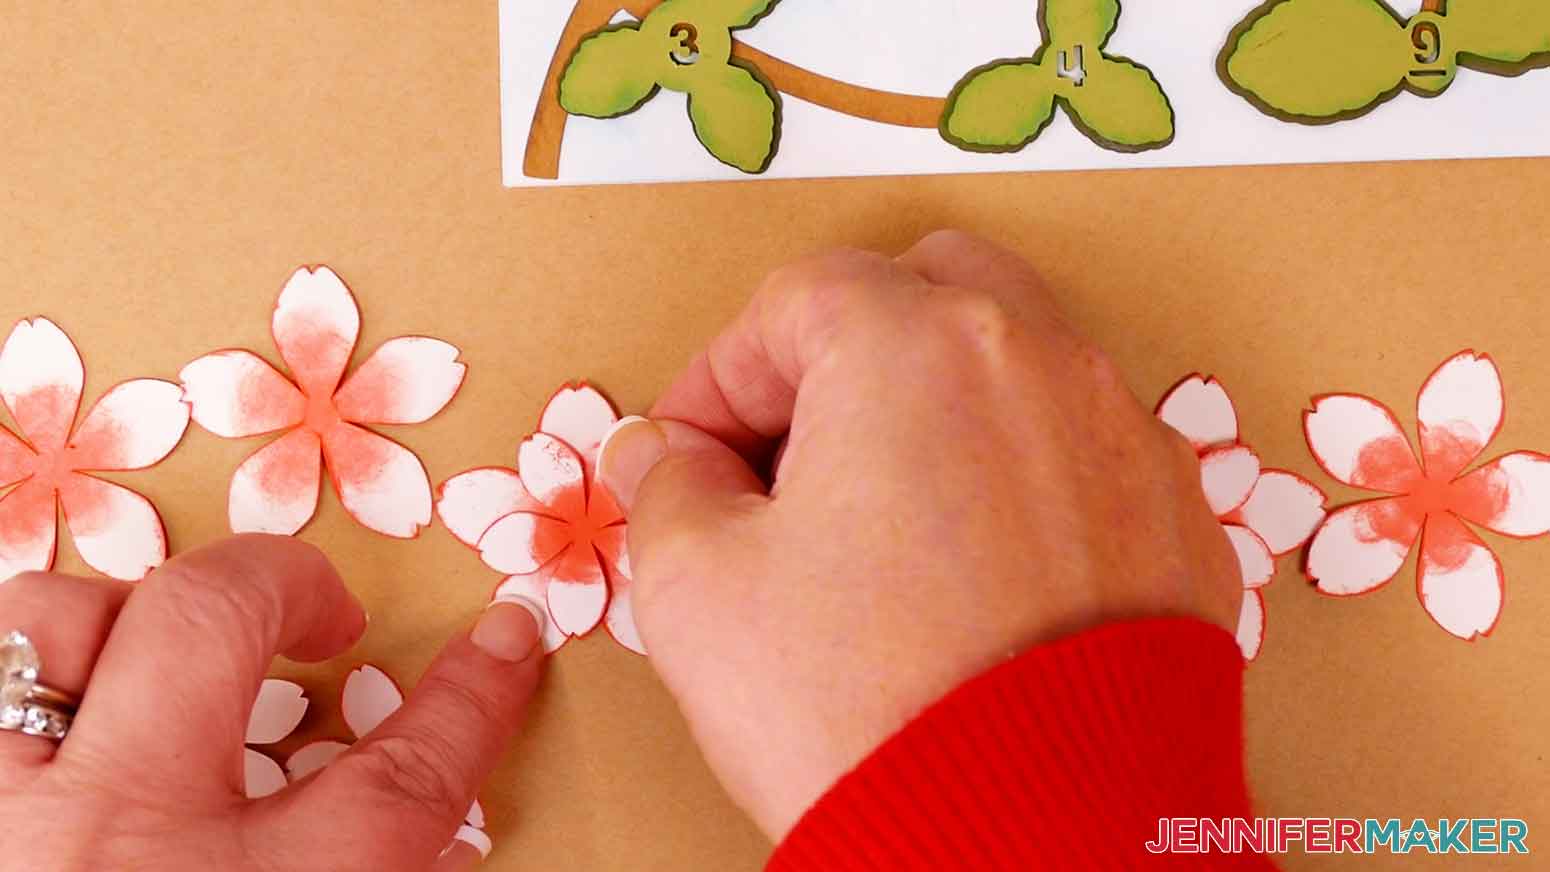 Place foam adhesive on the back of the front cherry blossom petals and press the petal layers together.